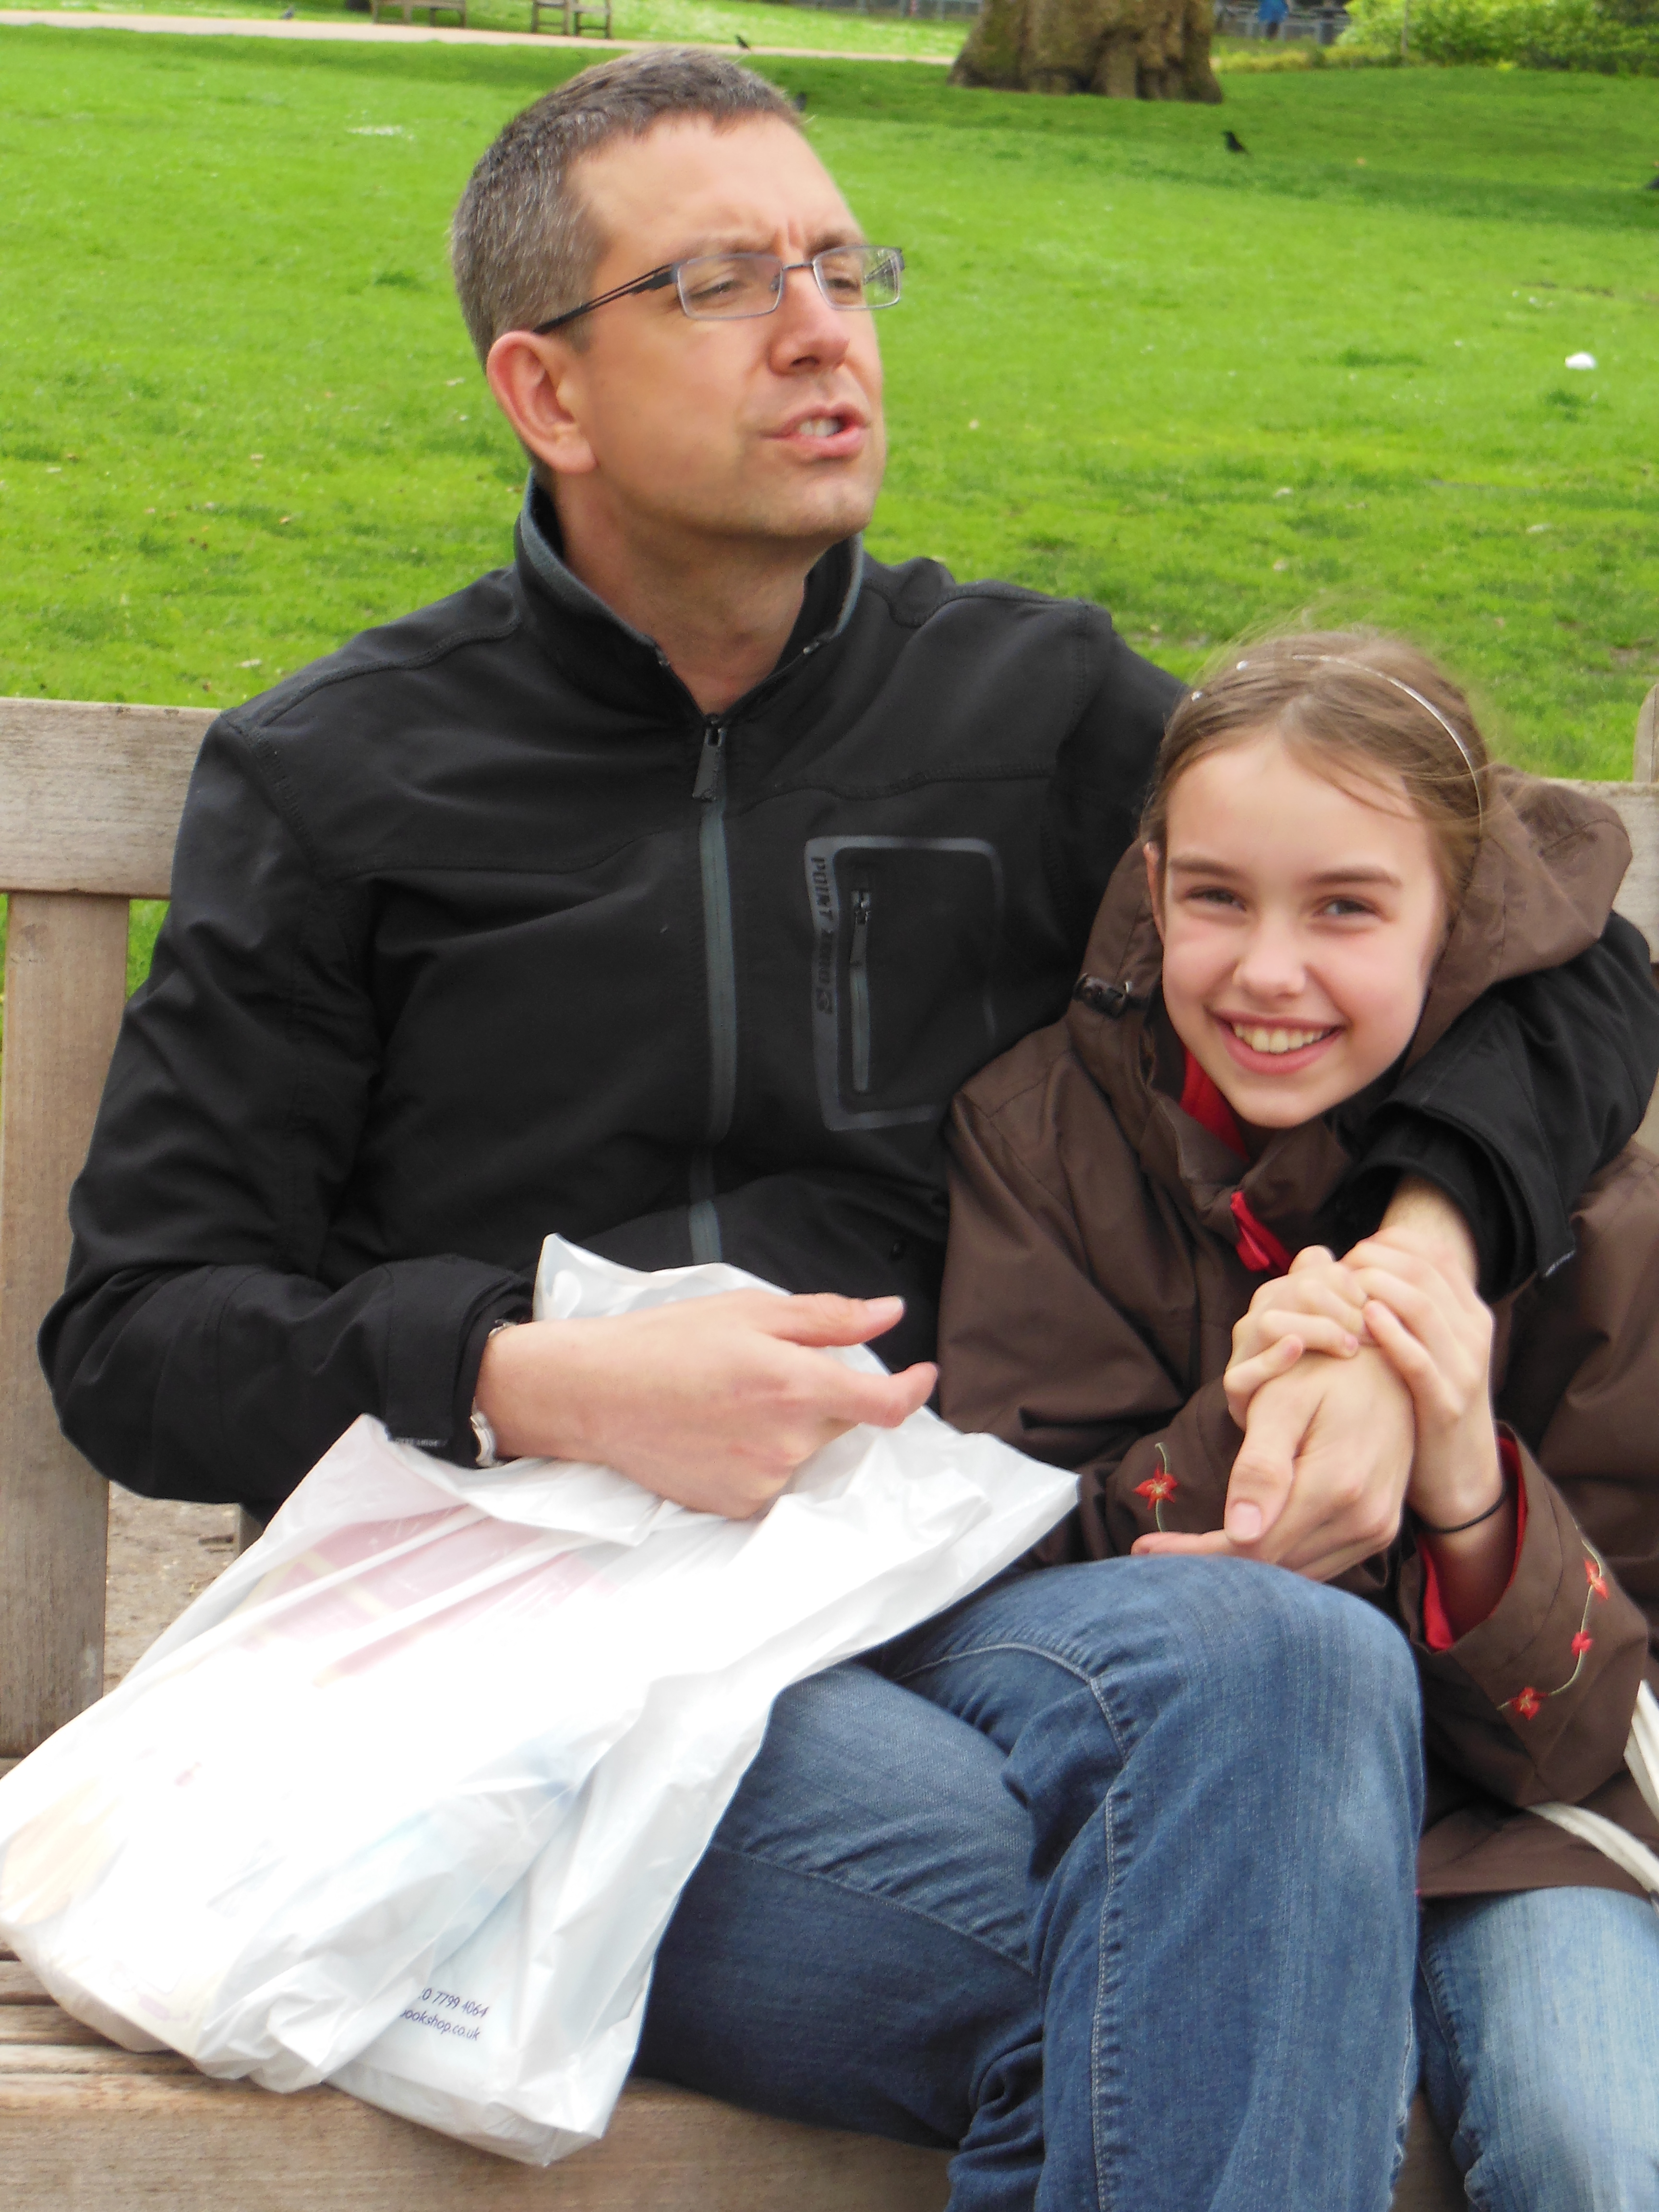 Jim and Hannah in London: can homeschool socialization be quantified?